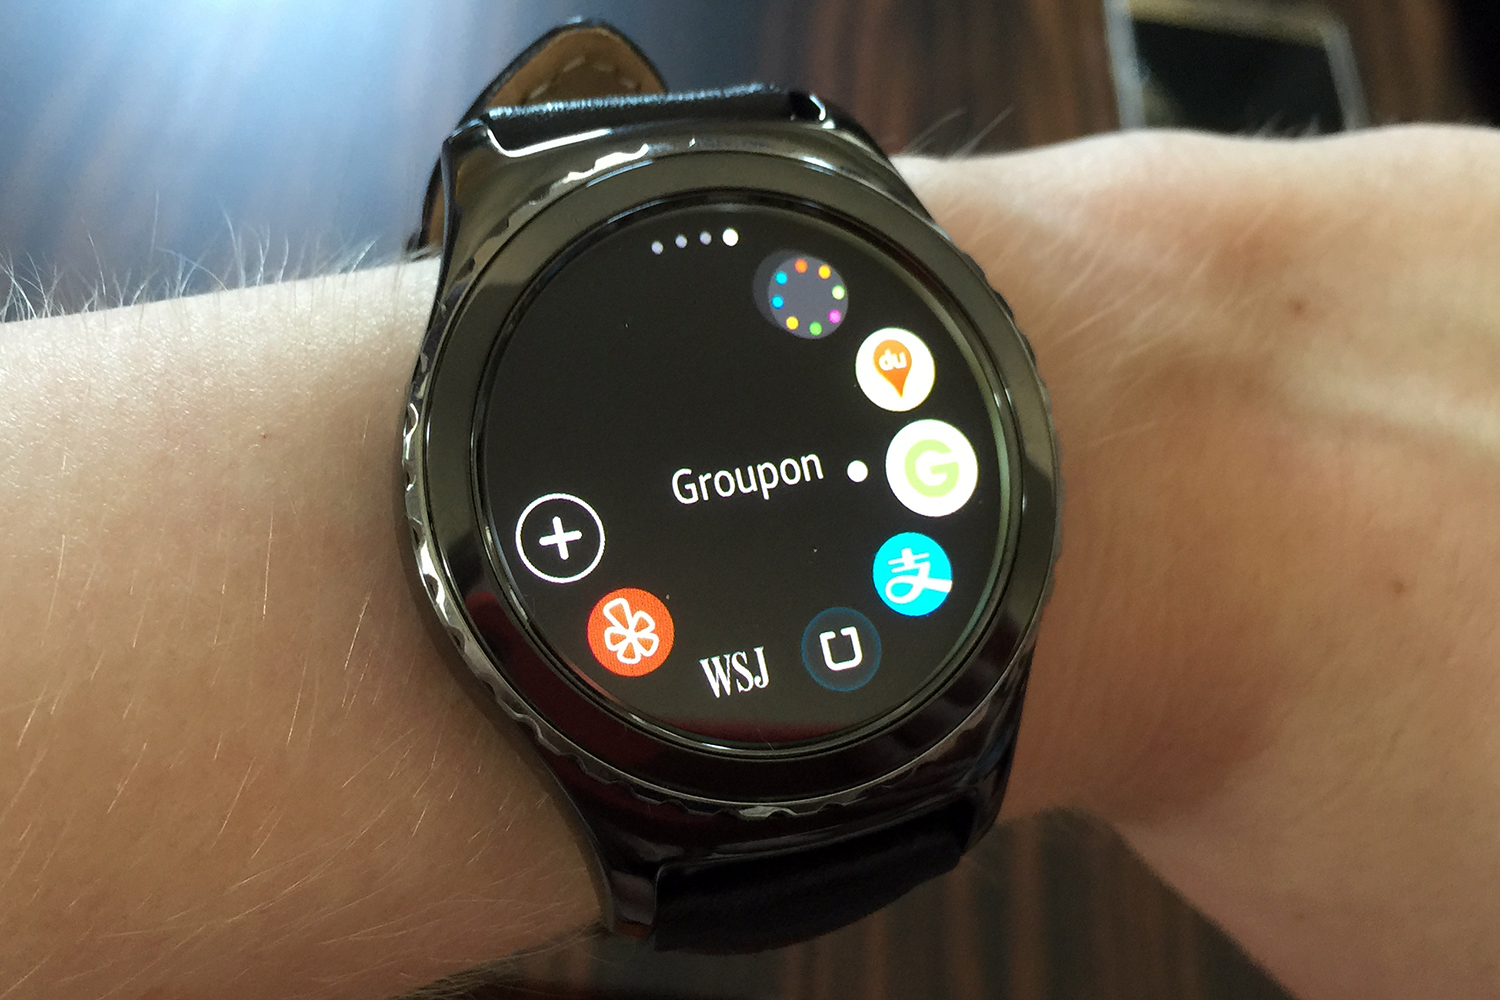 samsung gear s2 hands on classic 5337